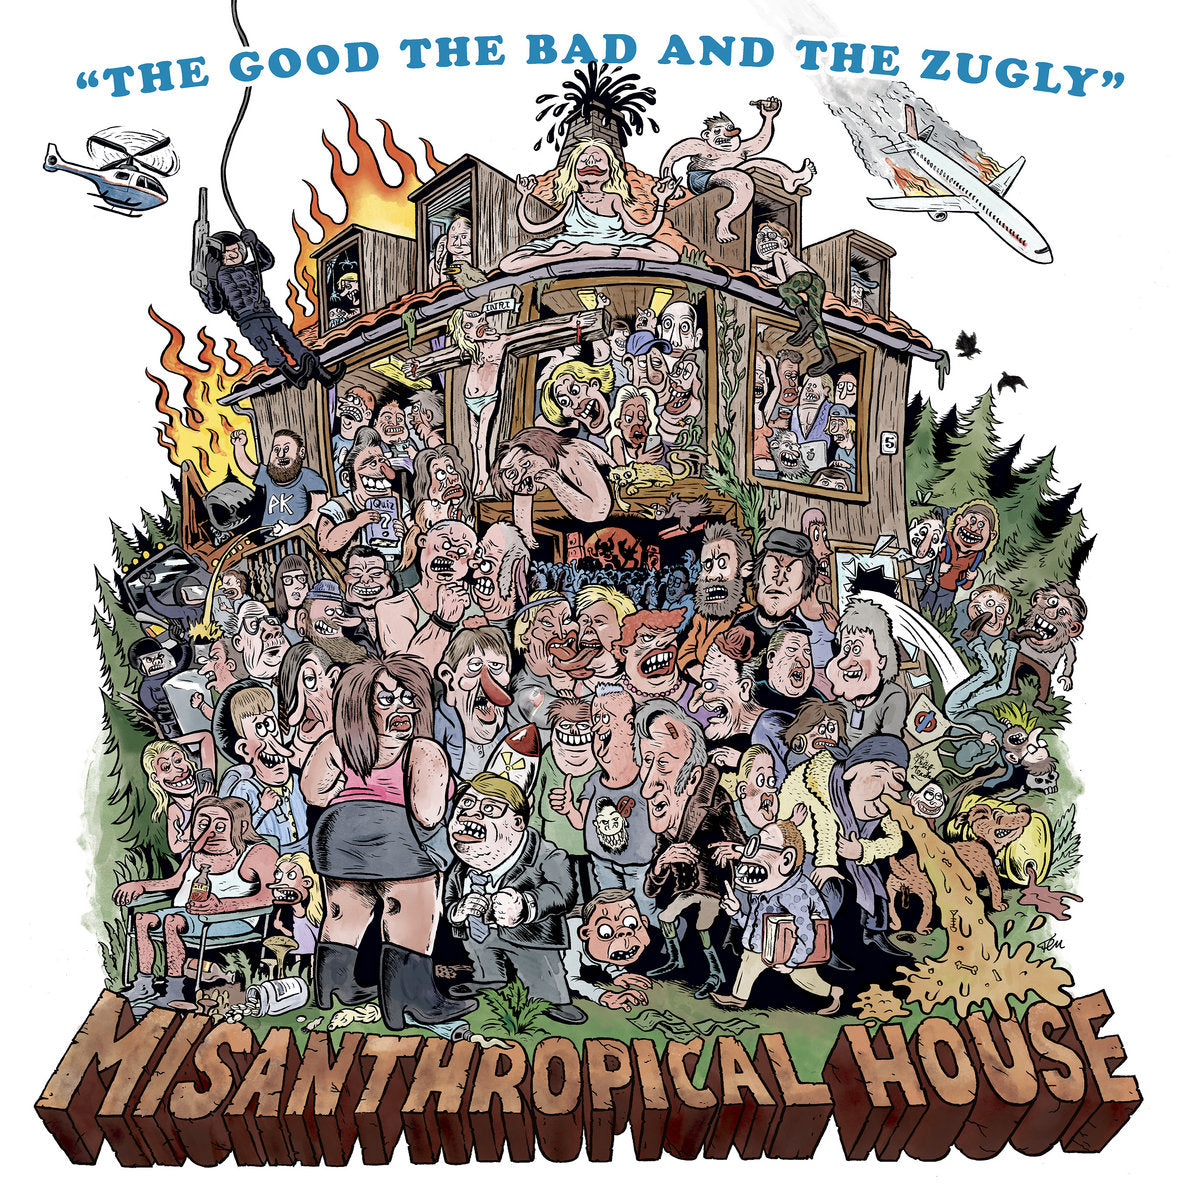 THE GOOD THE BAD AND THE ZUGLY • Misanthropical House (div. Colors) • LP